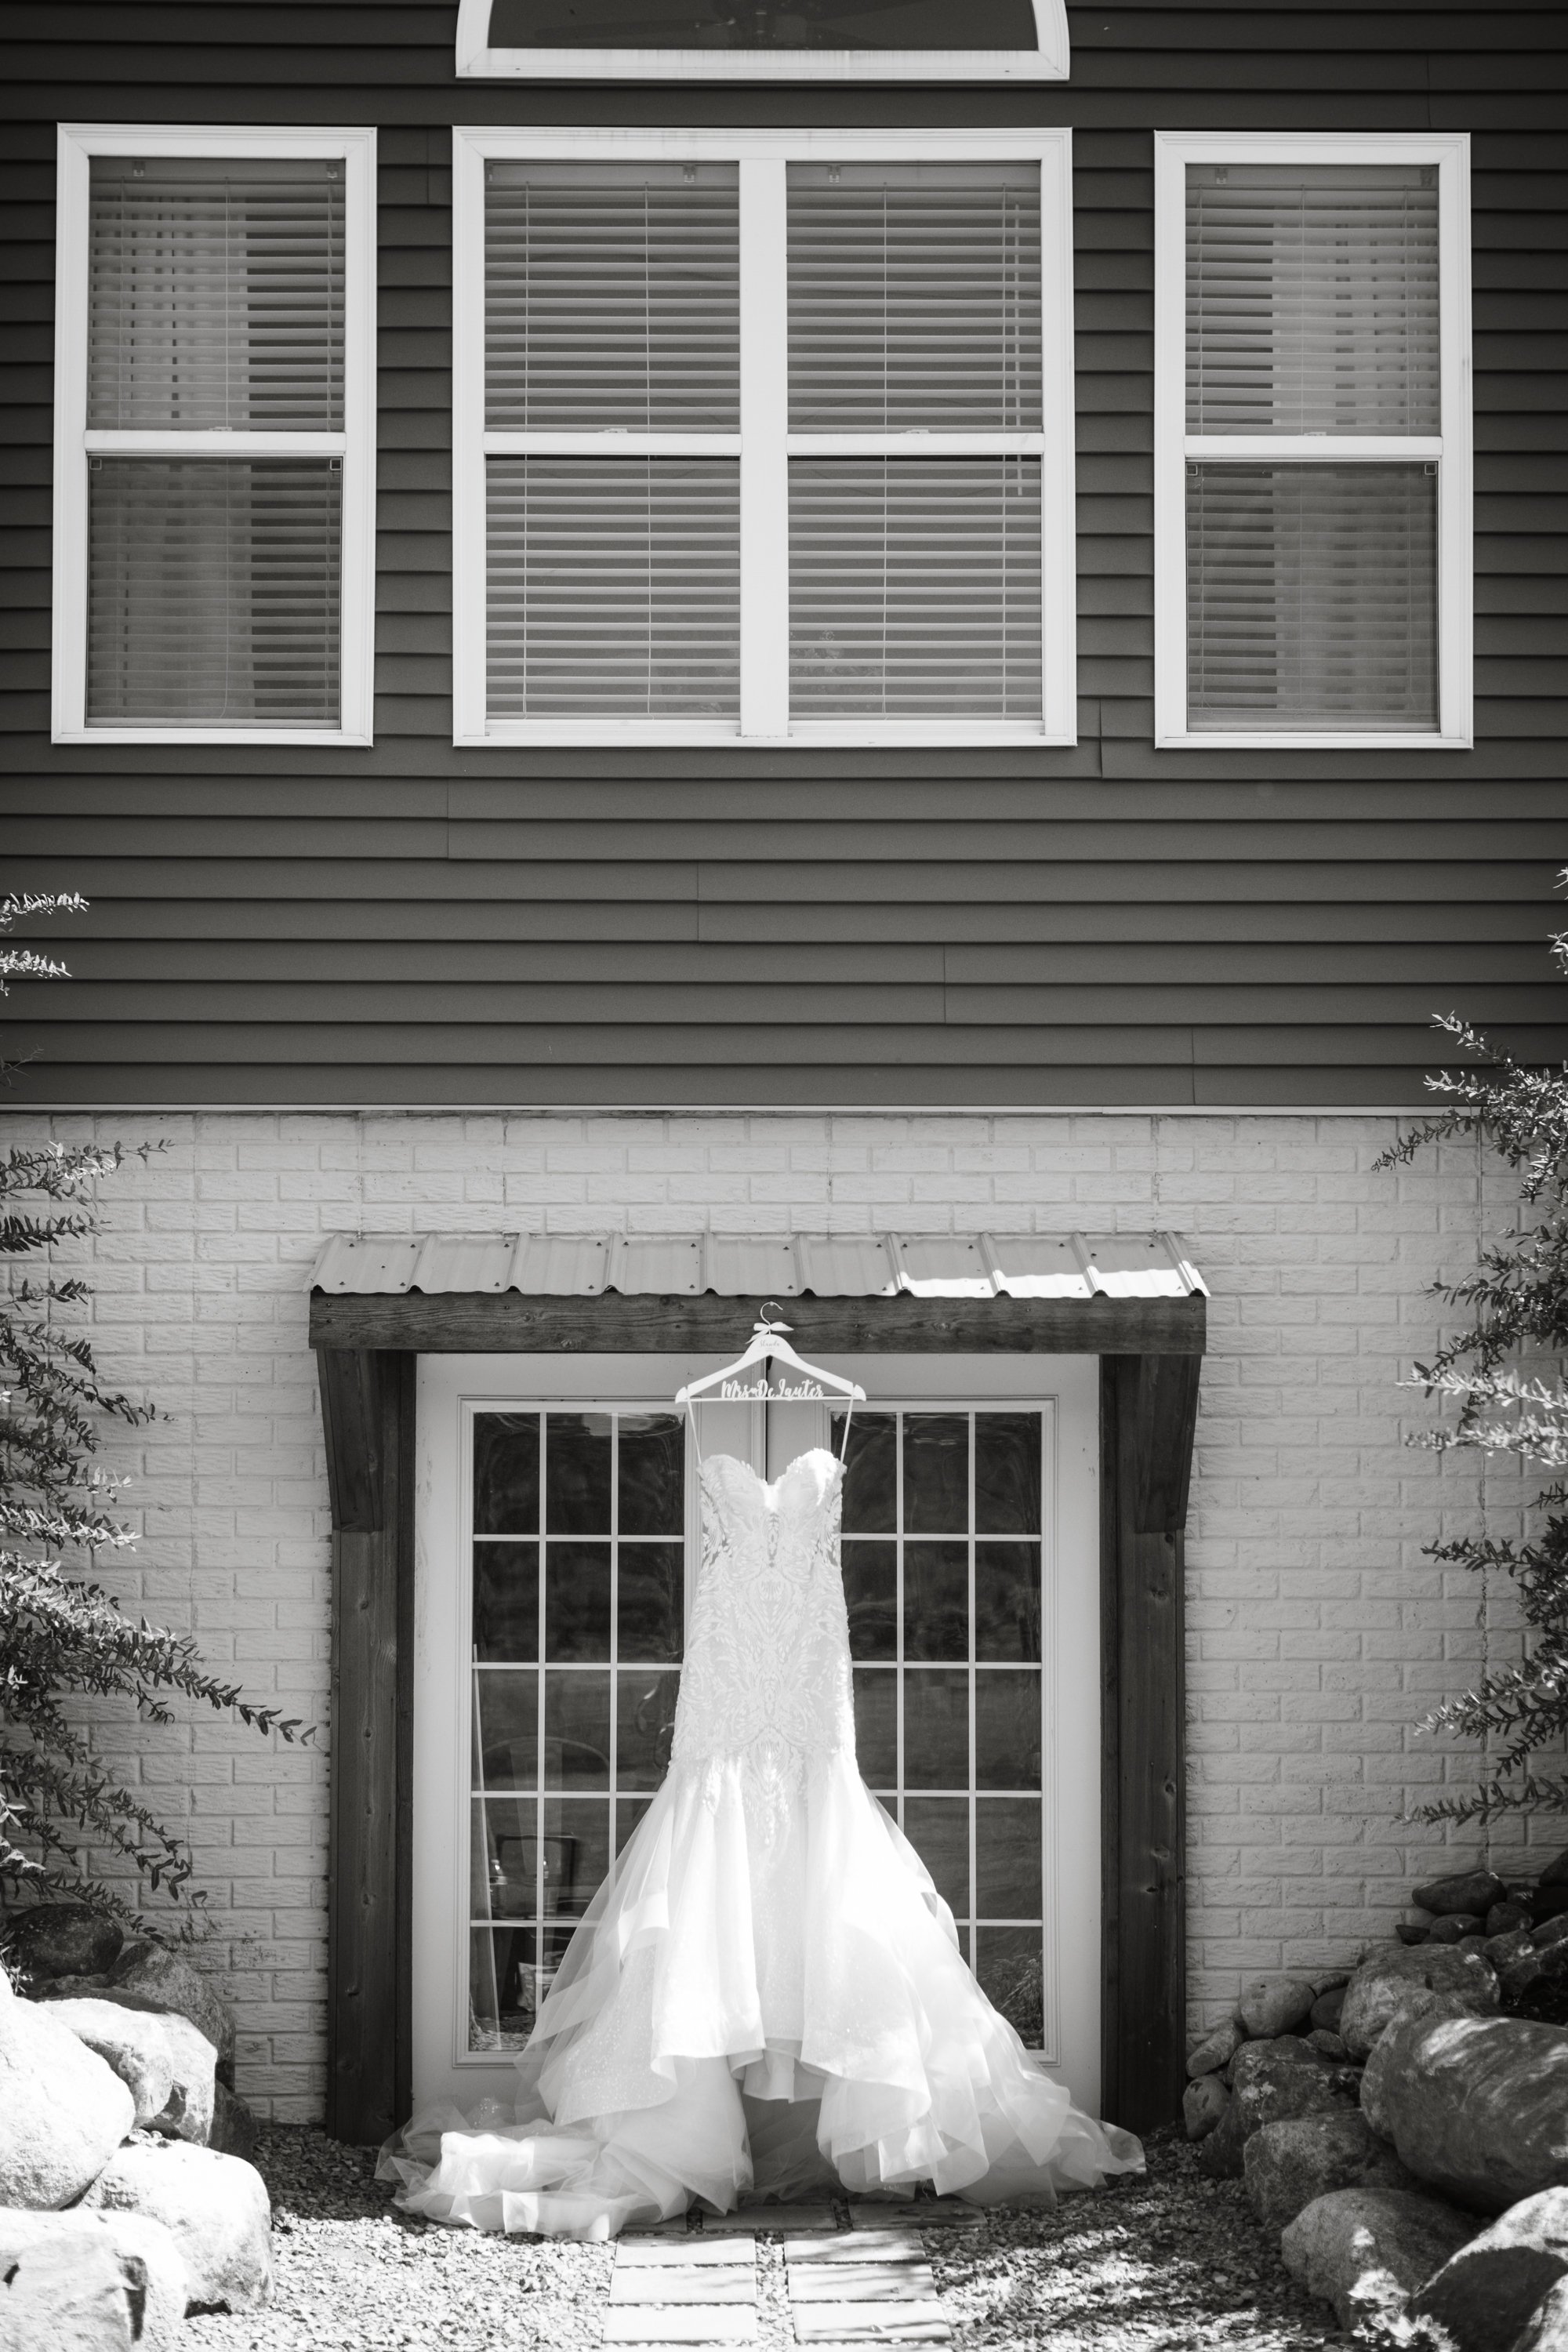 brides dress hanging at Meadow wood acres in morrice, michigan